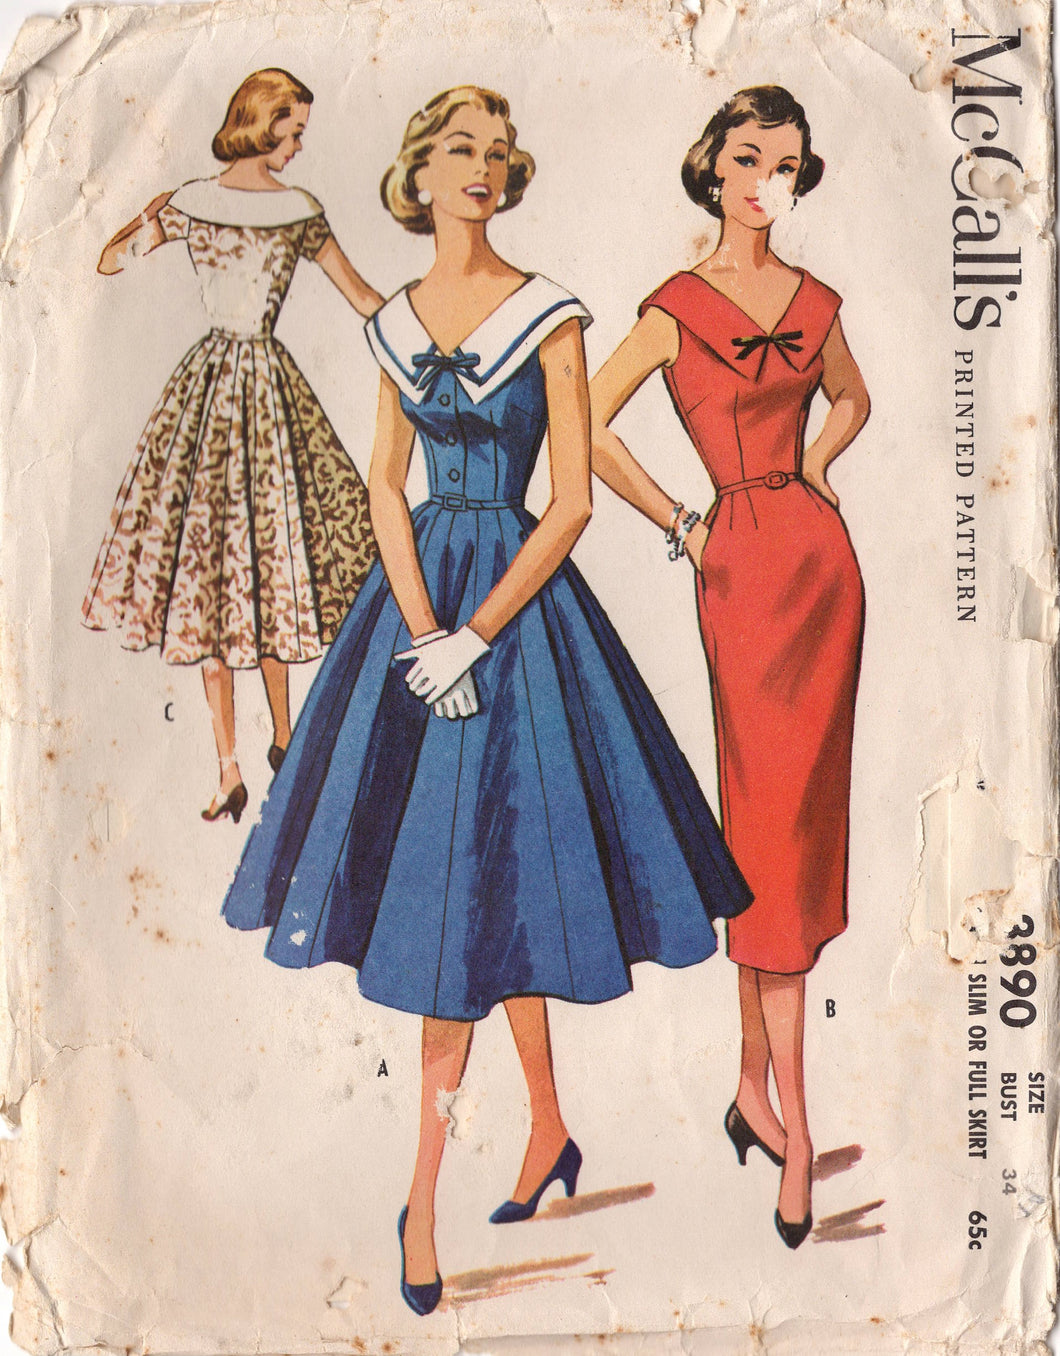 1950’s McCall's Large Collar Sheath or Fit and Flare Dress Pattern with 16 gore skirt - Bust 34” - No. 3890